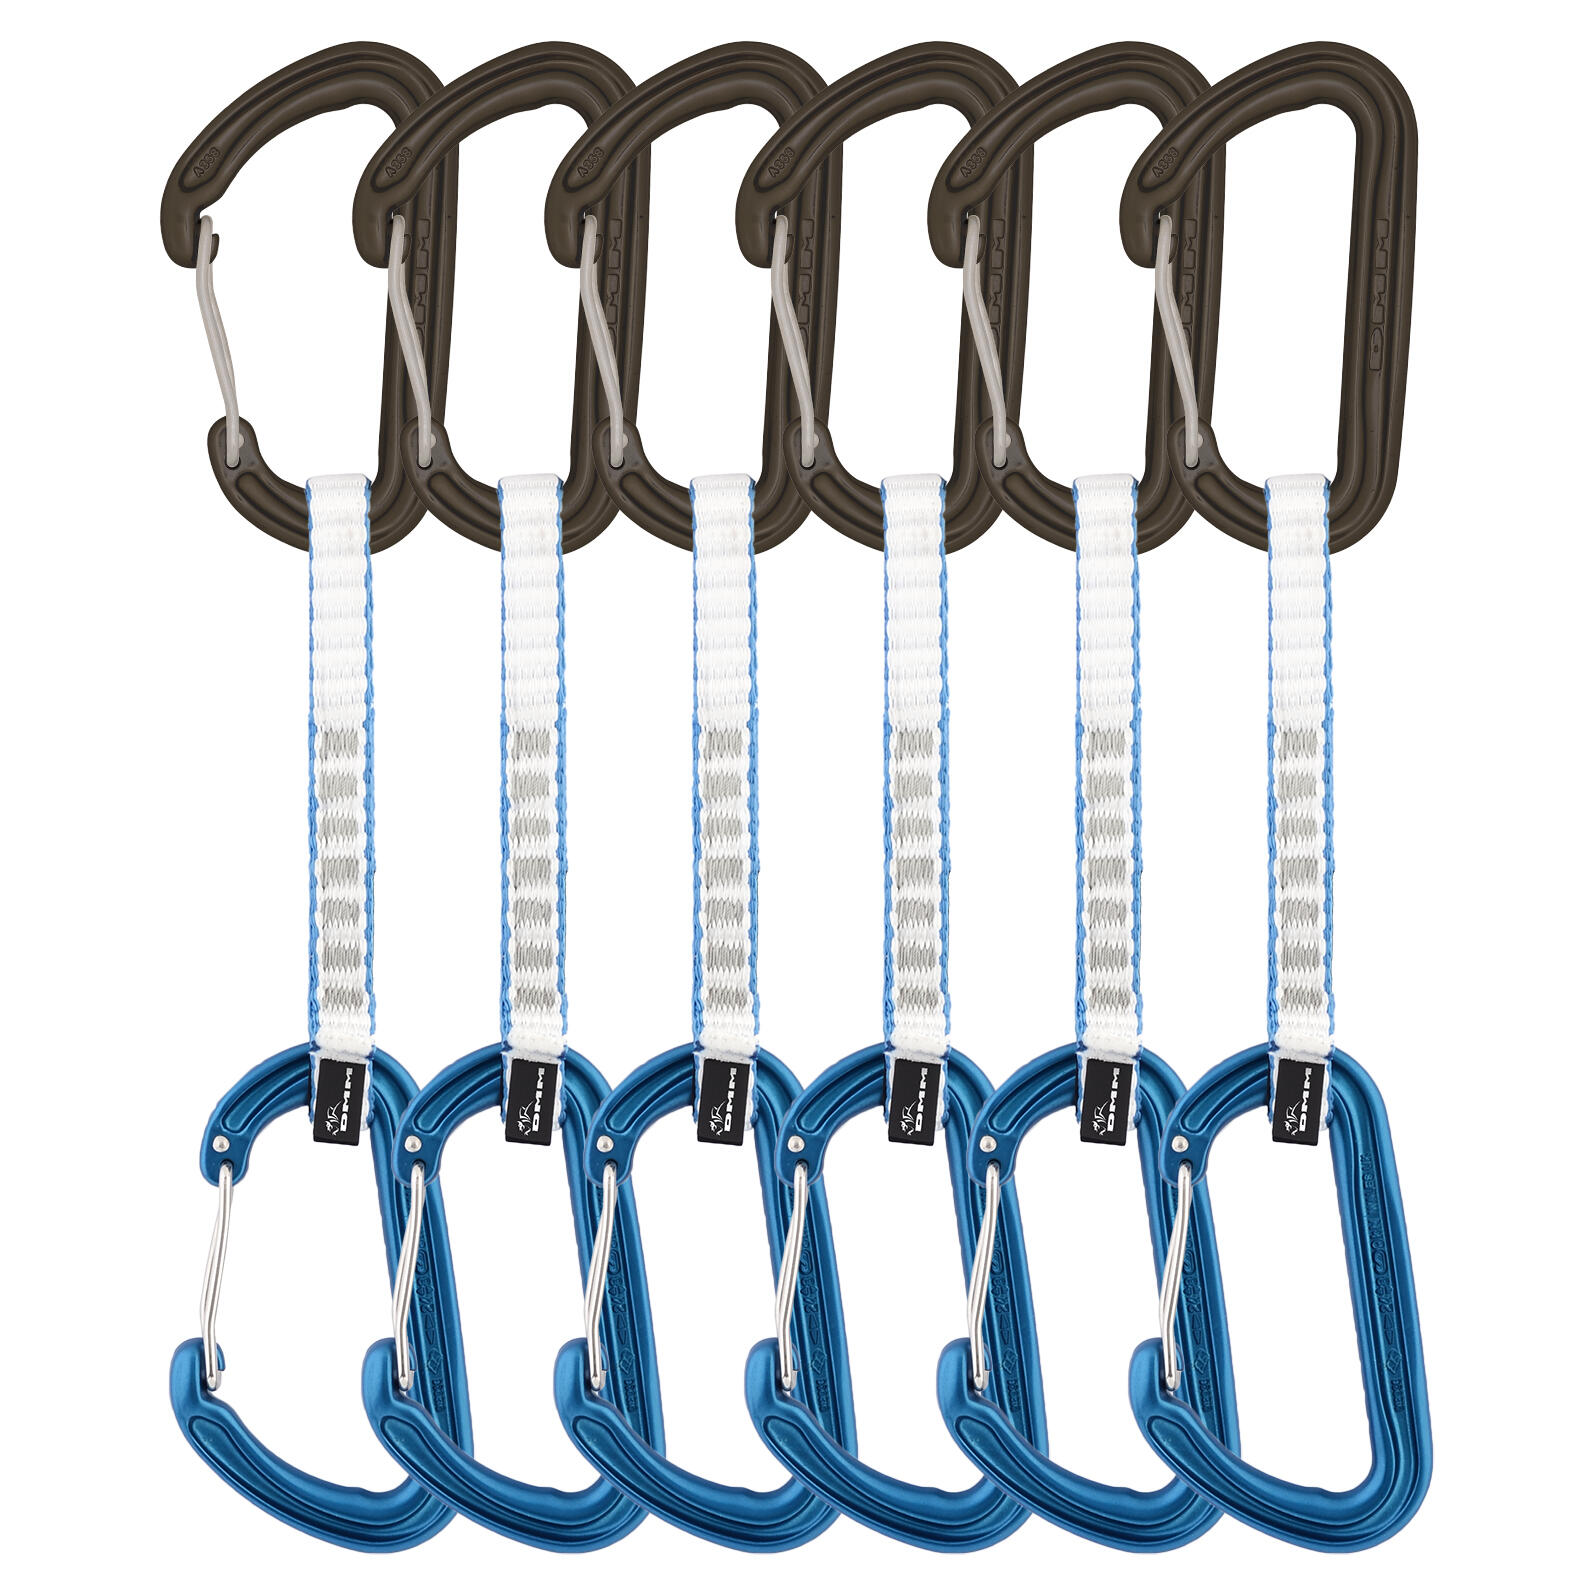 DMM Spectre Quickdraw 12cm - Blue - 6 Pack